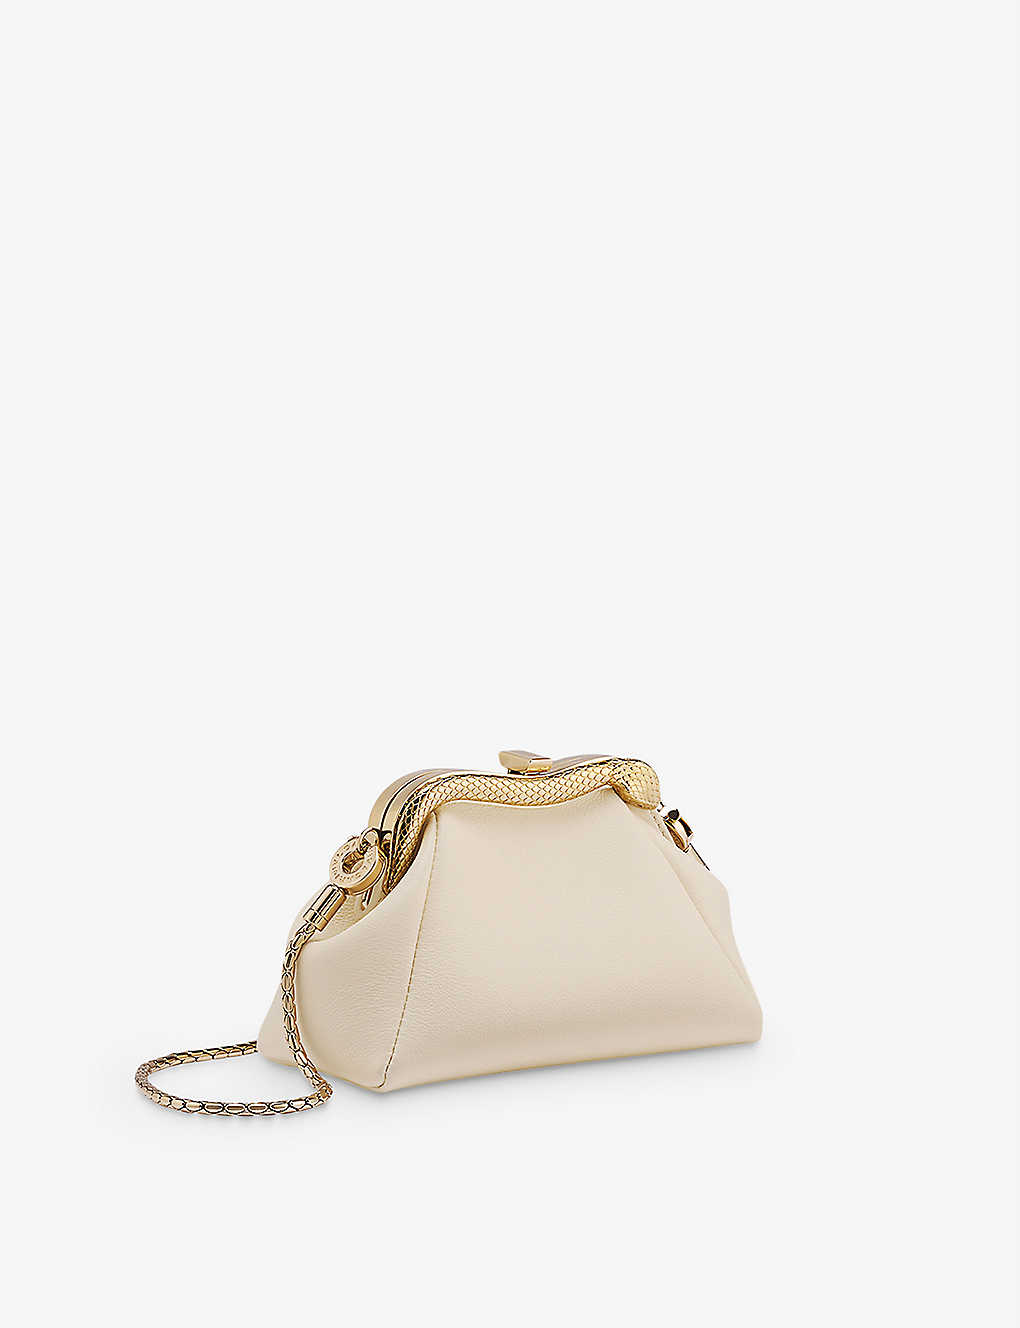 Bvlgari Serpentine Leather Pouch In Ivory